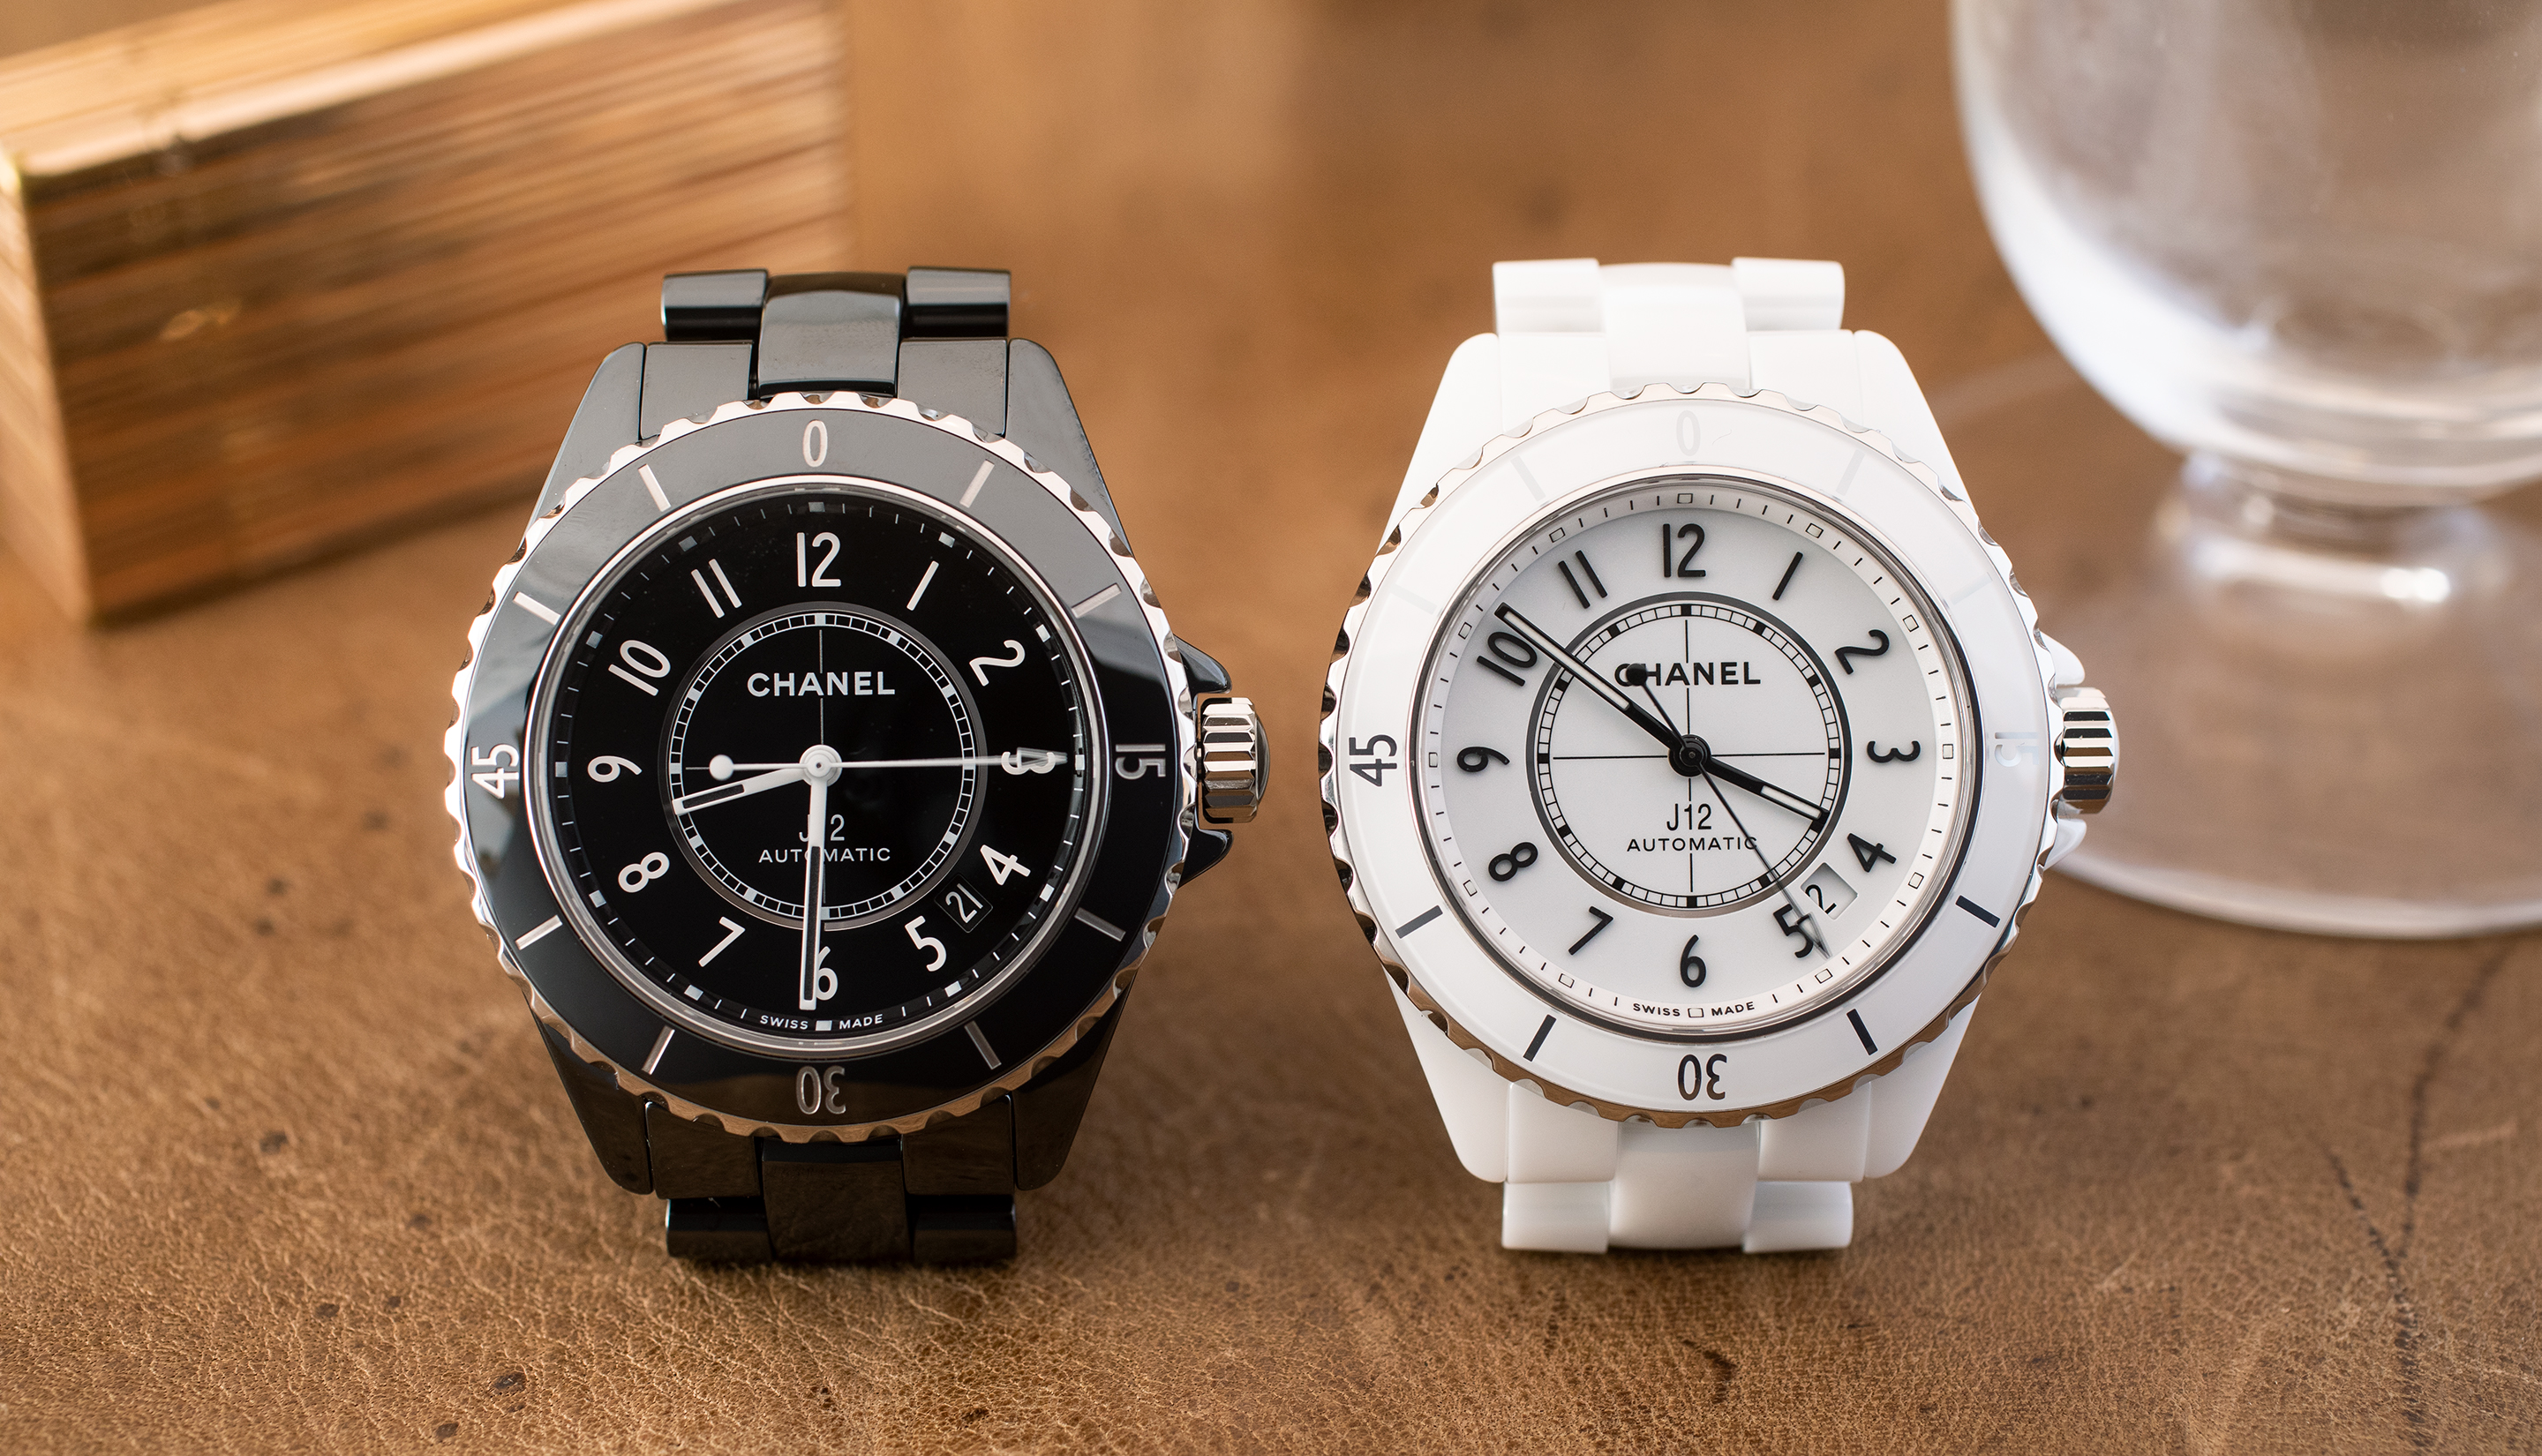 Introducing The New And Improved Chanel J12 Live Pics  Pricing   Hodinkee